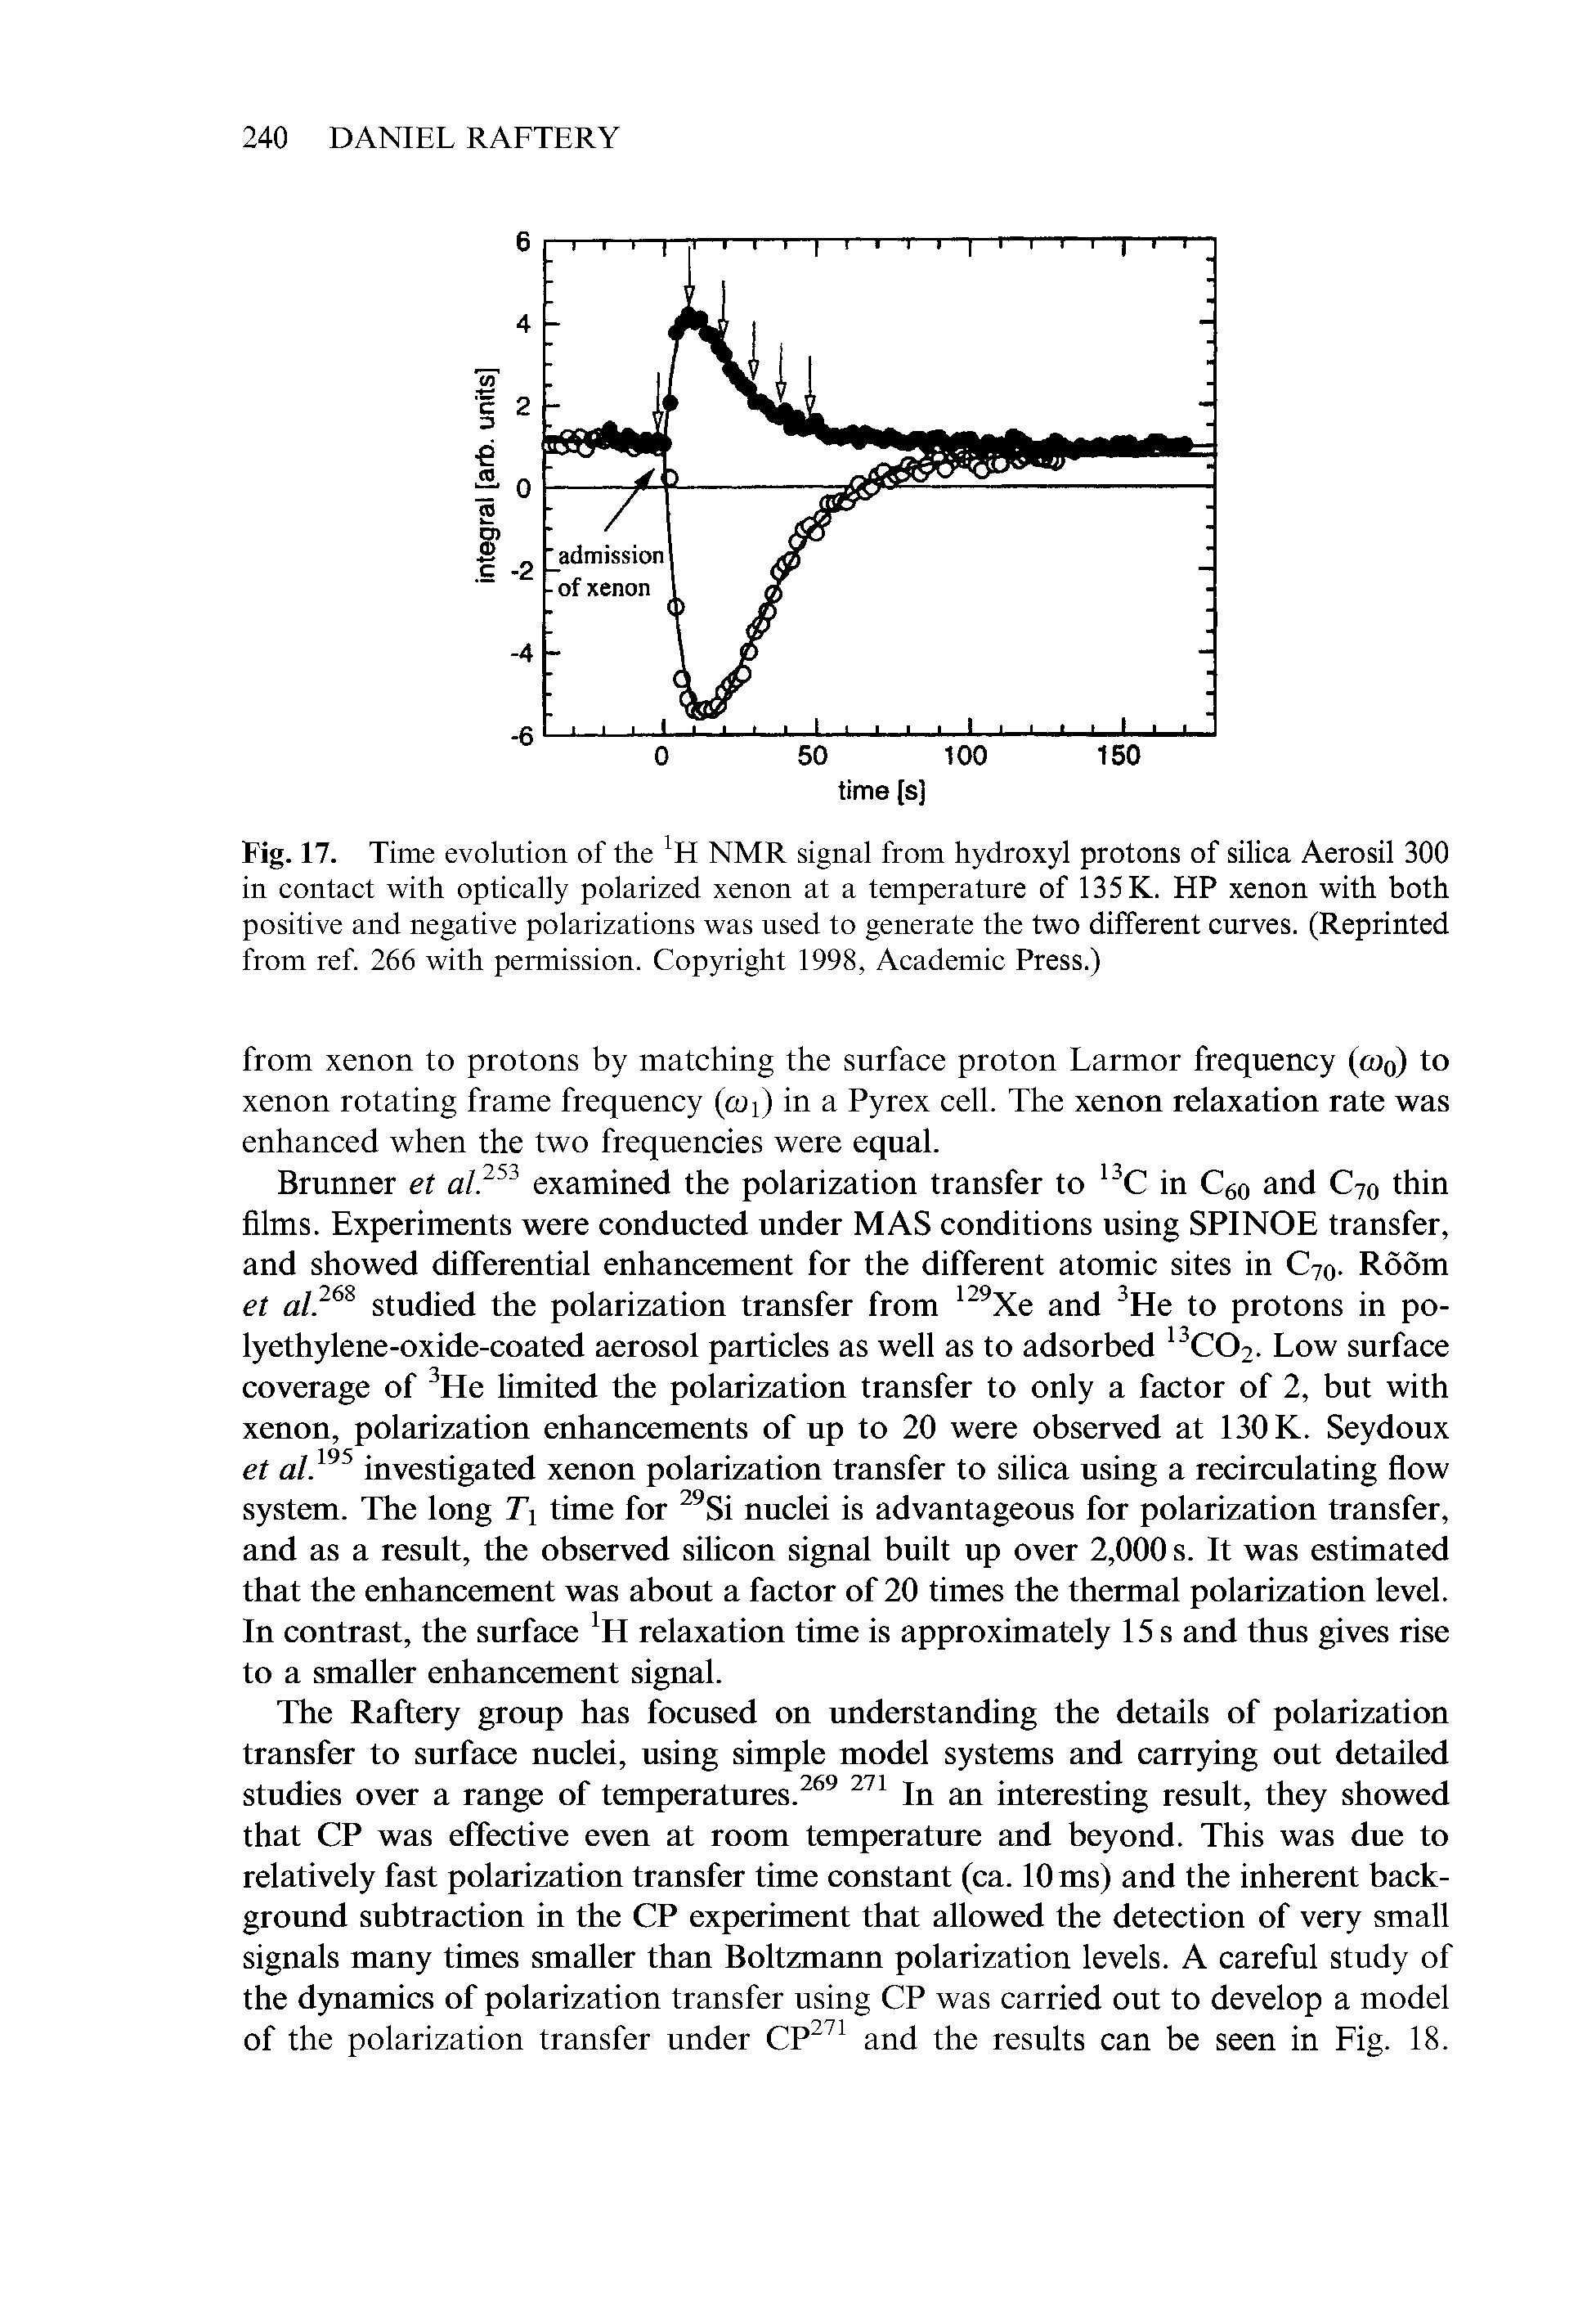 Fig. 17. Time evolution of the NMR signal from hydroxyl protons of silica Aerosil 300 in contact with optically polarized xenon at a temperature of 135 K. HP xenon with both positive and negative polarizations was used to generate the two different curves. (Reprinted from ref 266 with permission. Copyright 1998, Academic Press.)...